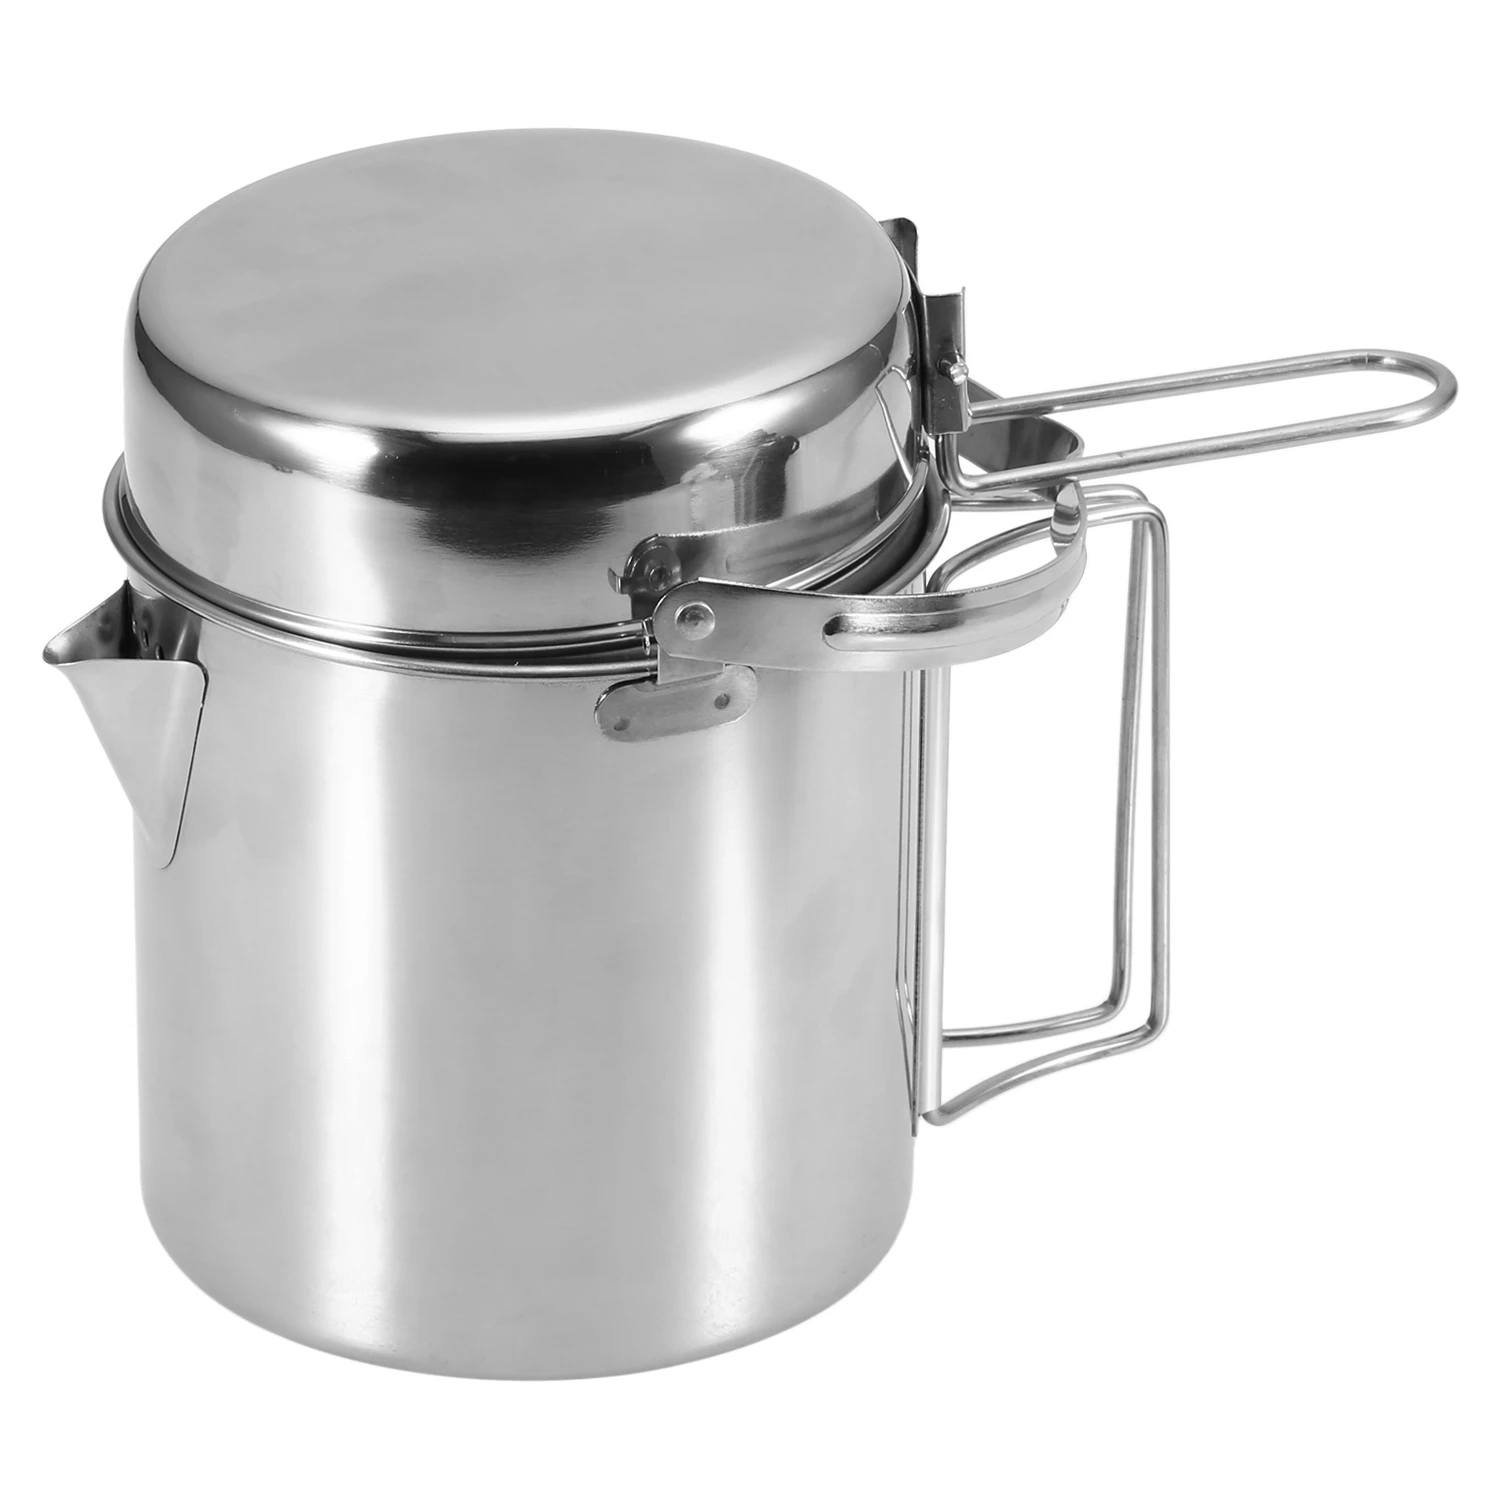 

1L Stainless Steel Cooking Kettle Portable Outdoor Camping Backpacking Pot with Foldable Handle Outdoor Cooking Utensils